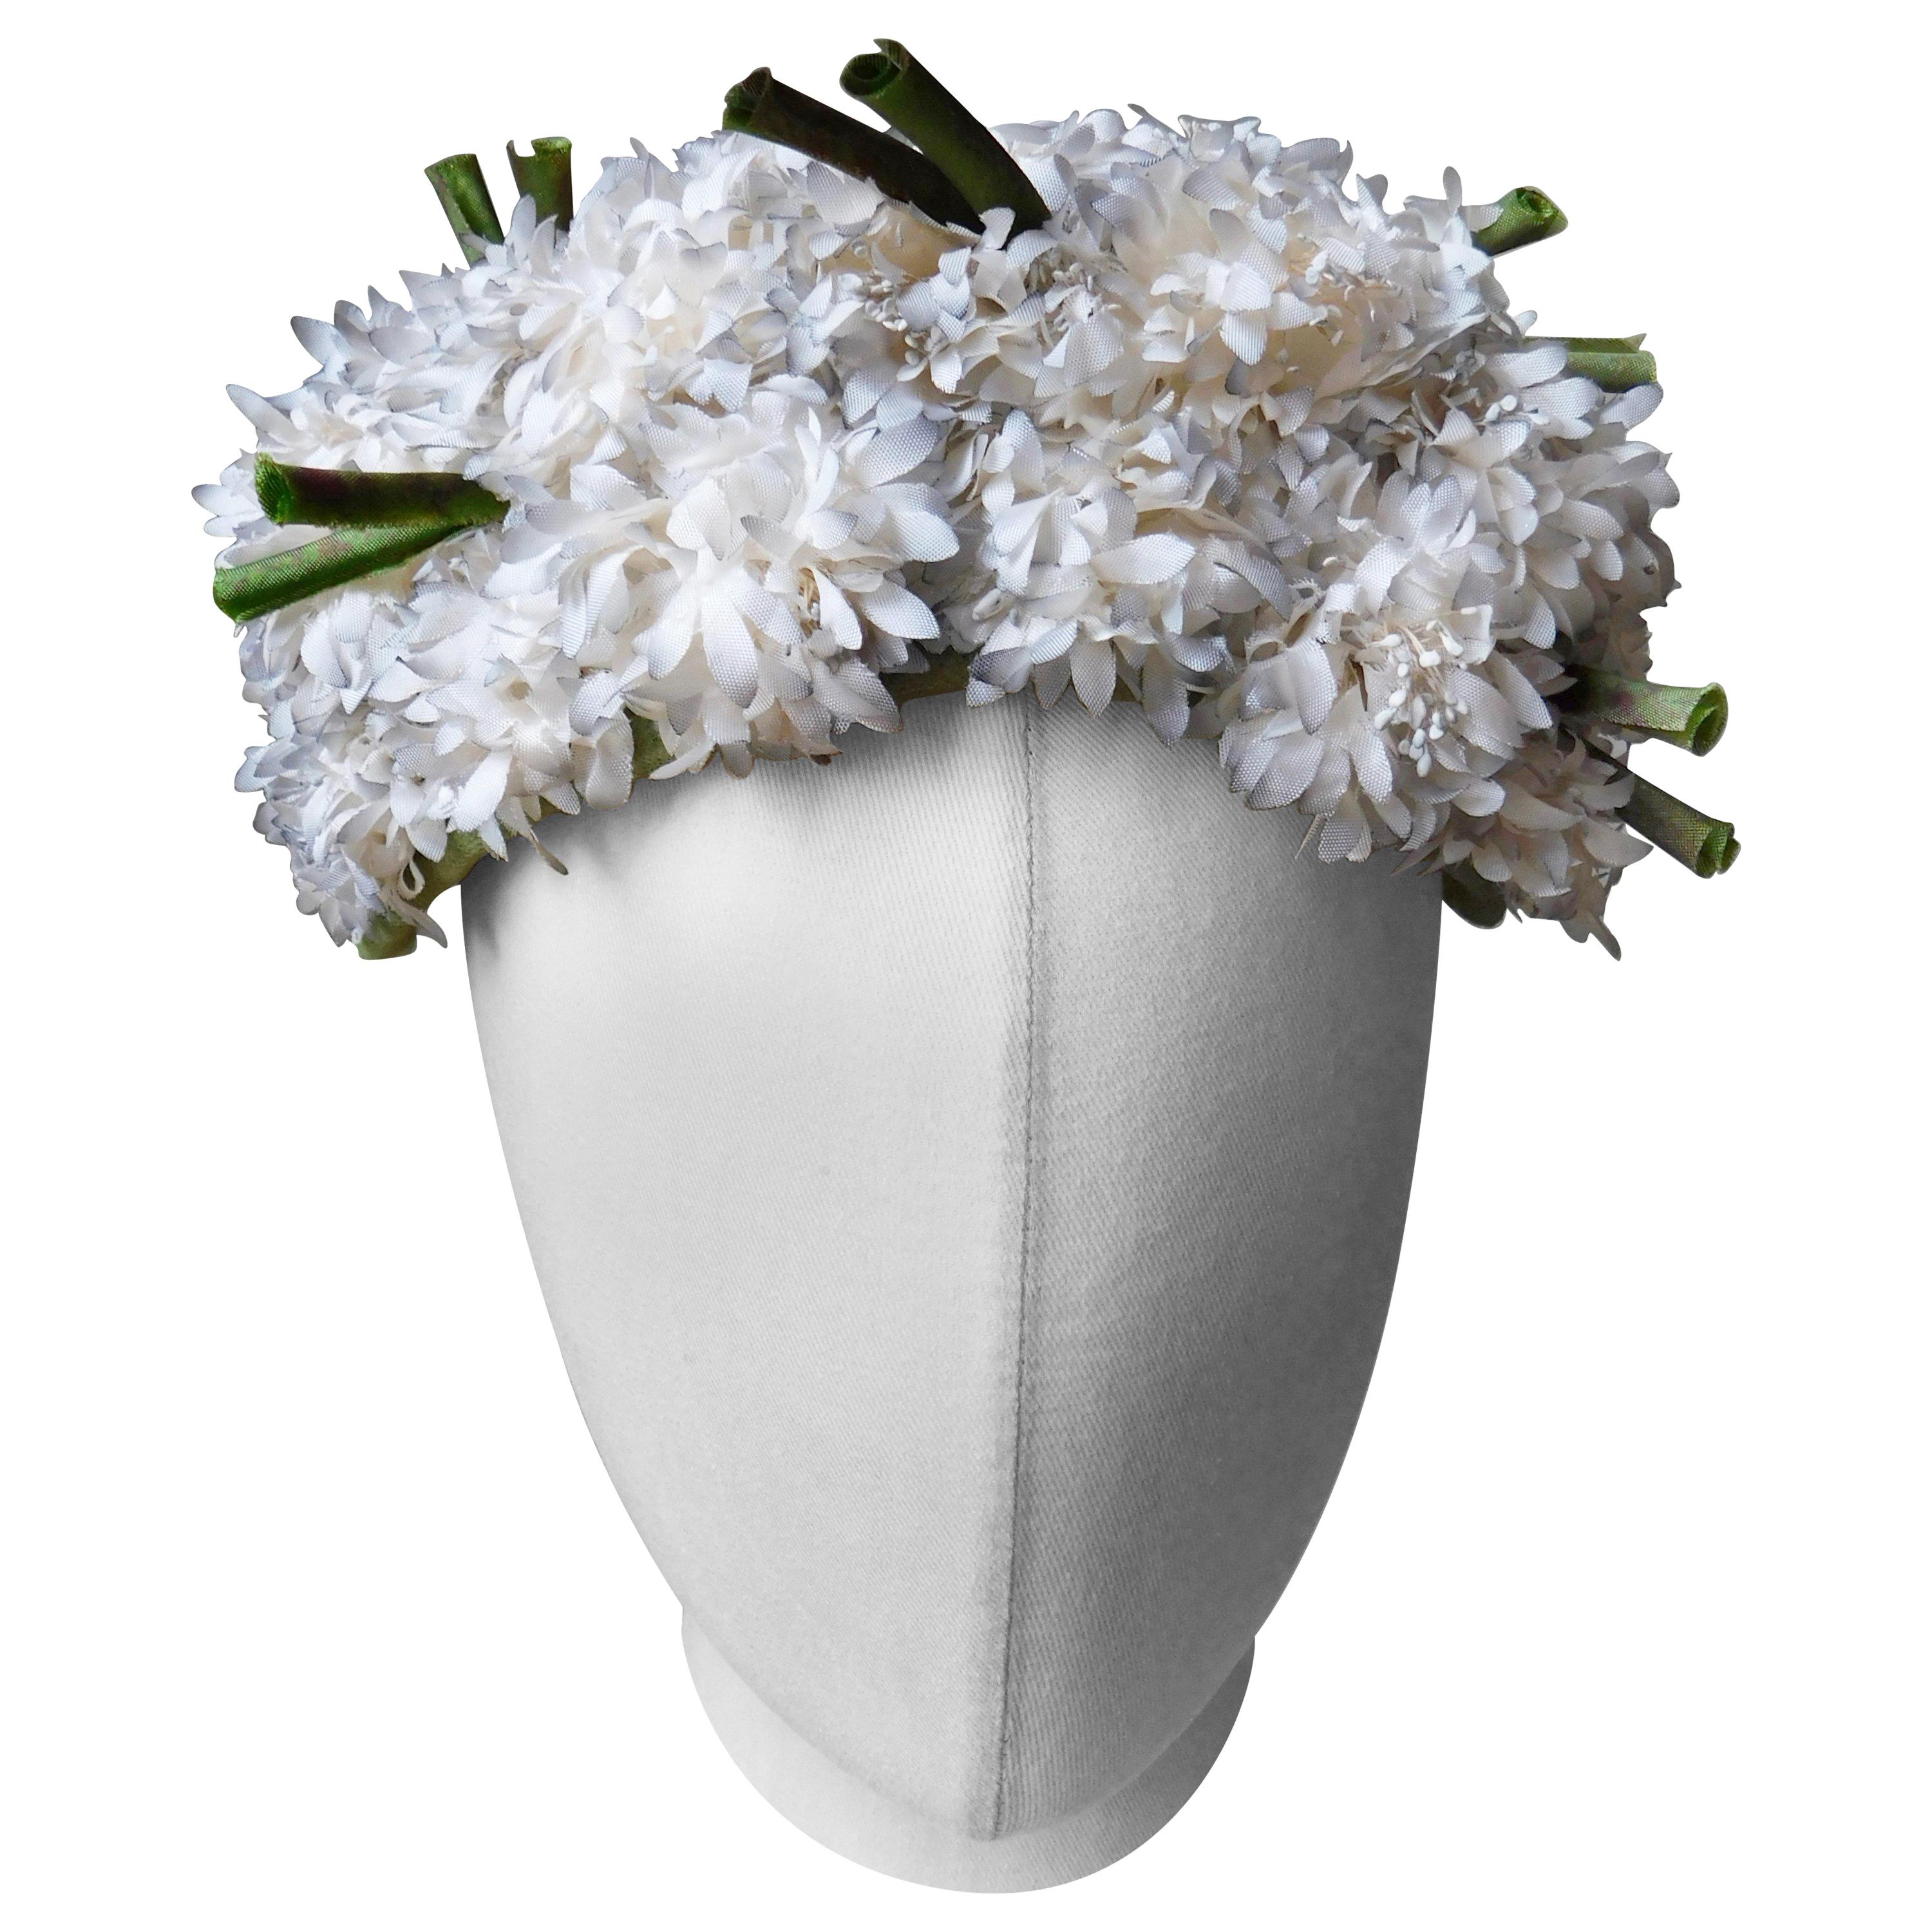 1960's Hat Fully covered in Small White Silk Flowers By Maison de Bonneterie